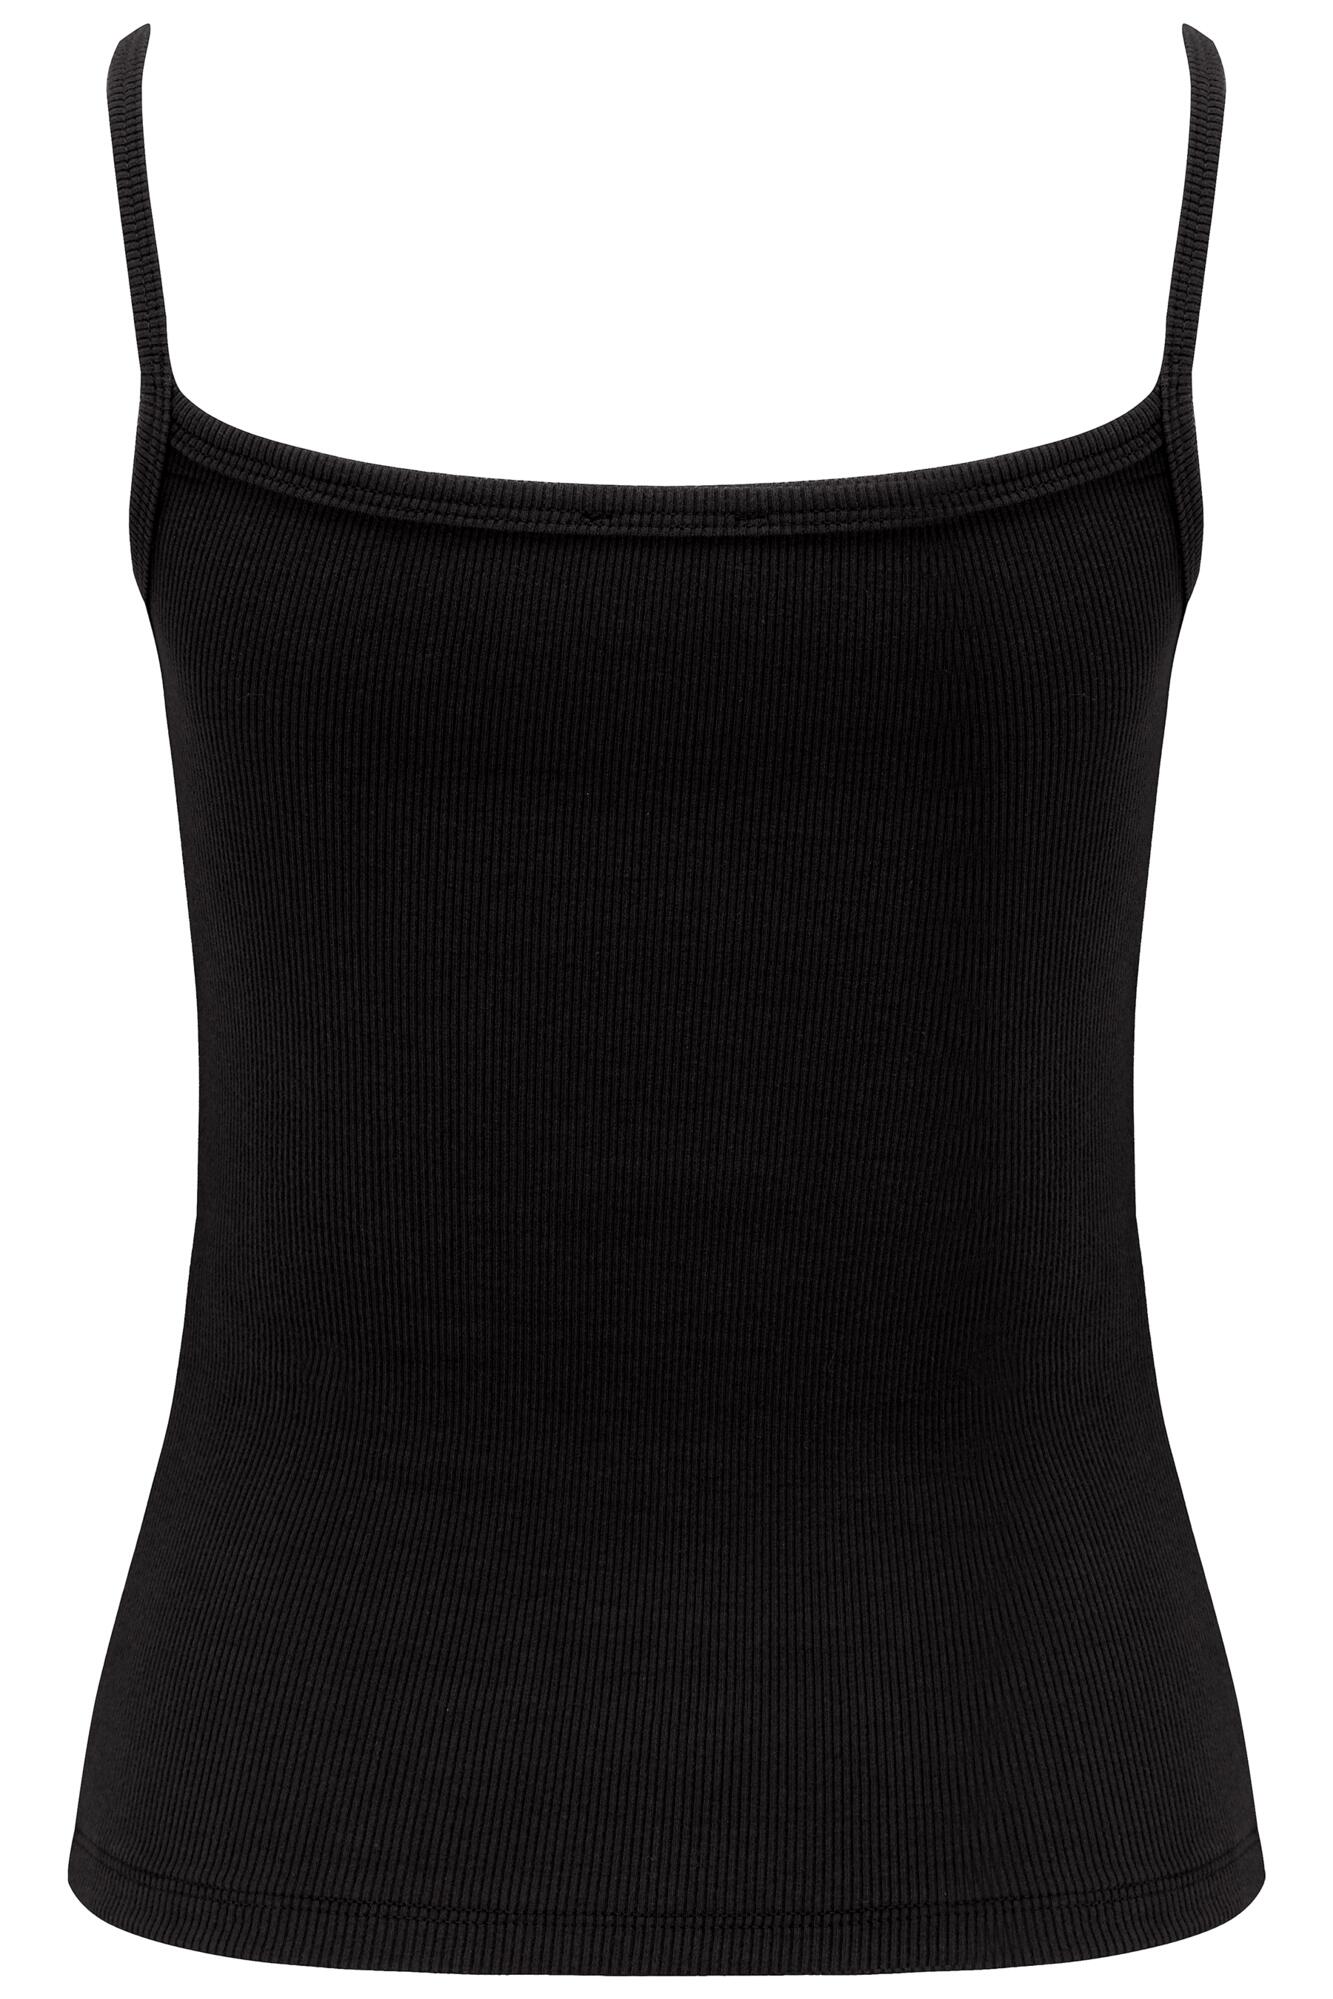 JUST MY SIZE Women's Plus Size Stretch Jersey Cami